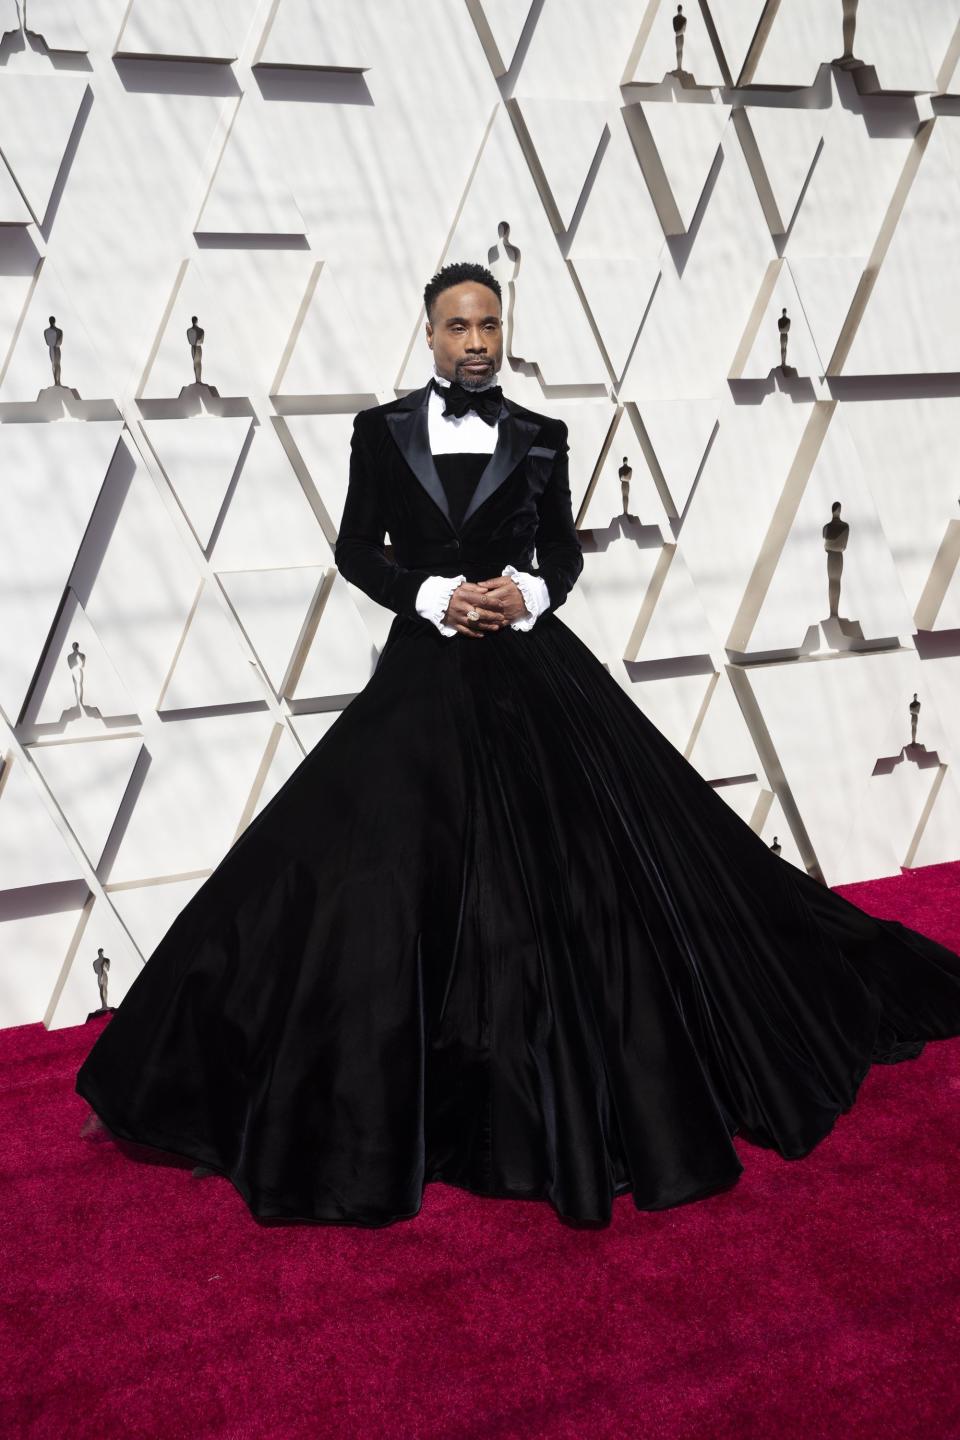 Billy Porter's Tuxedo Dress Tops Our List of the Most TalkedAbout